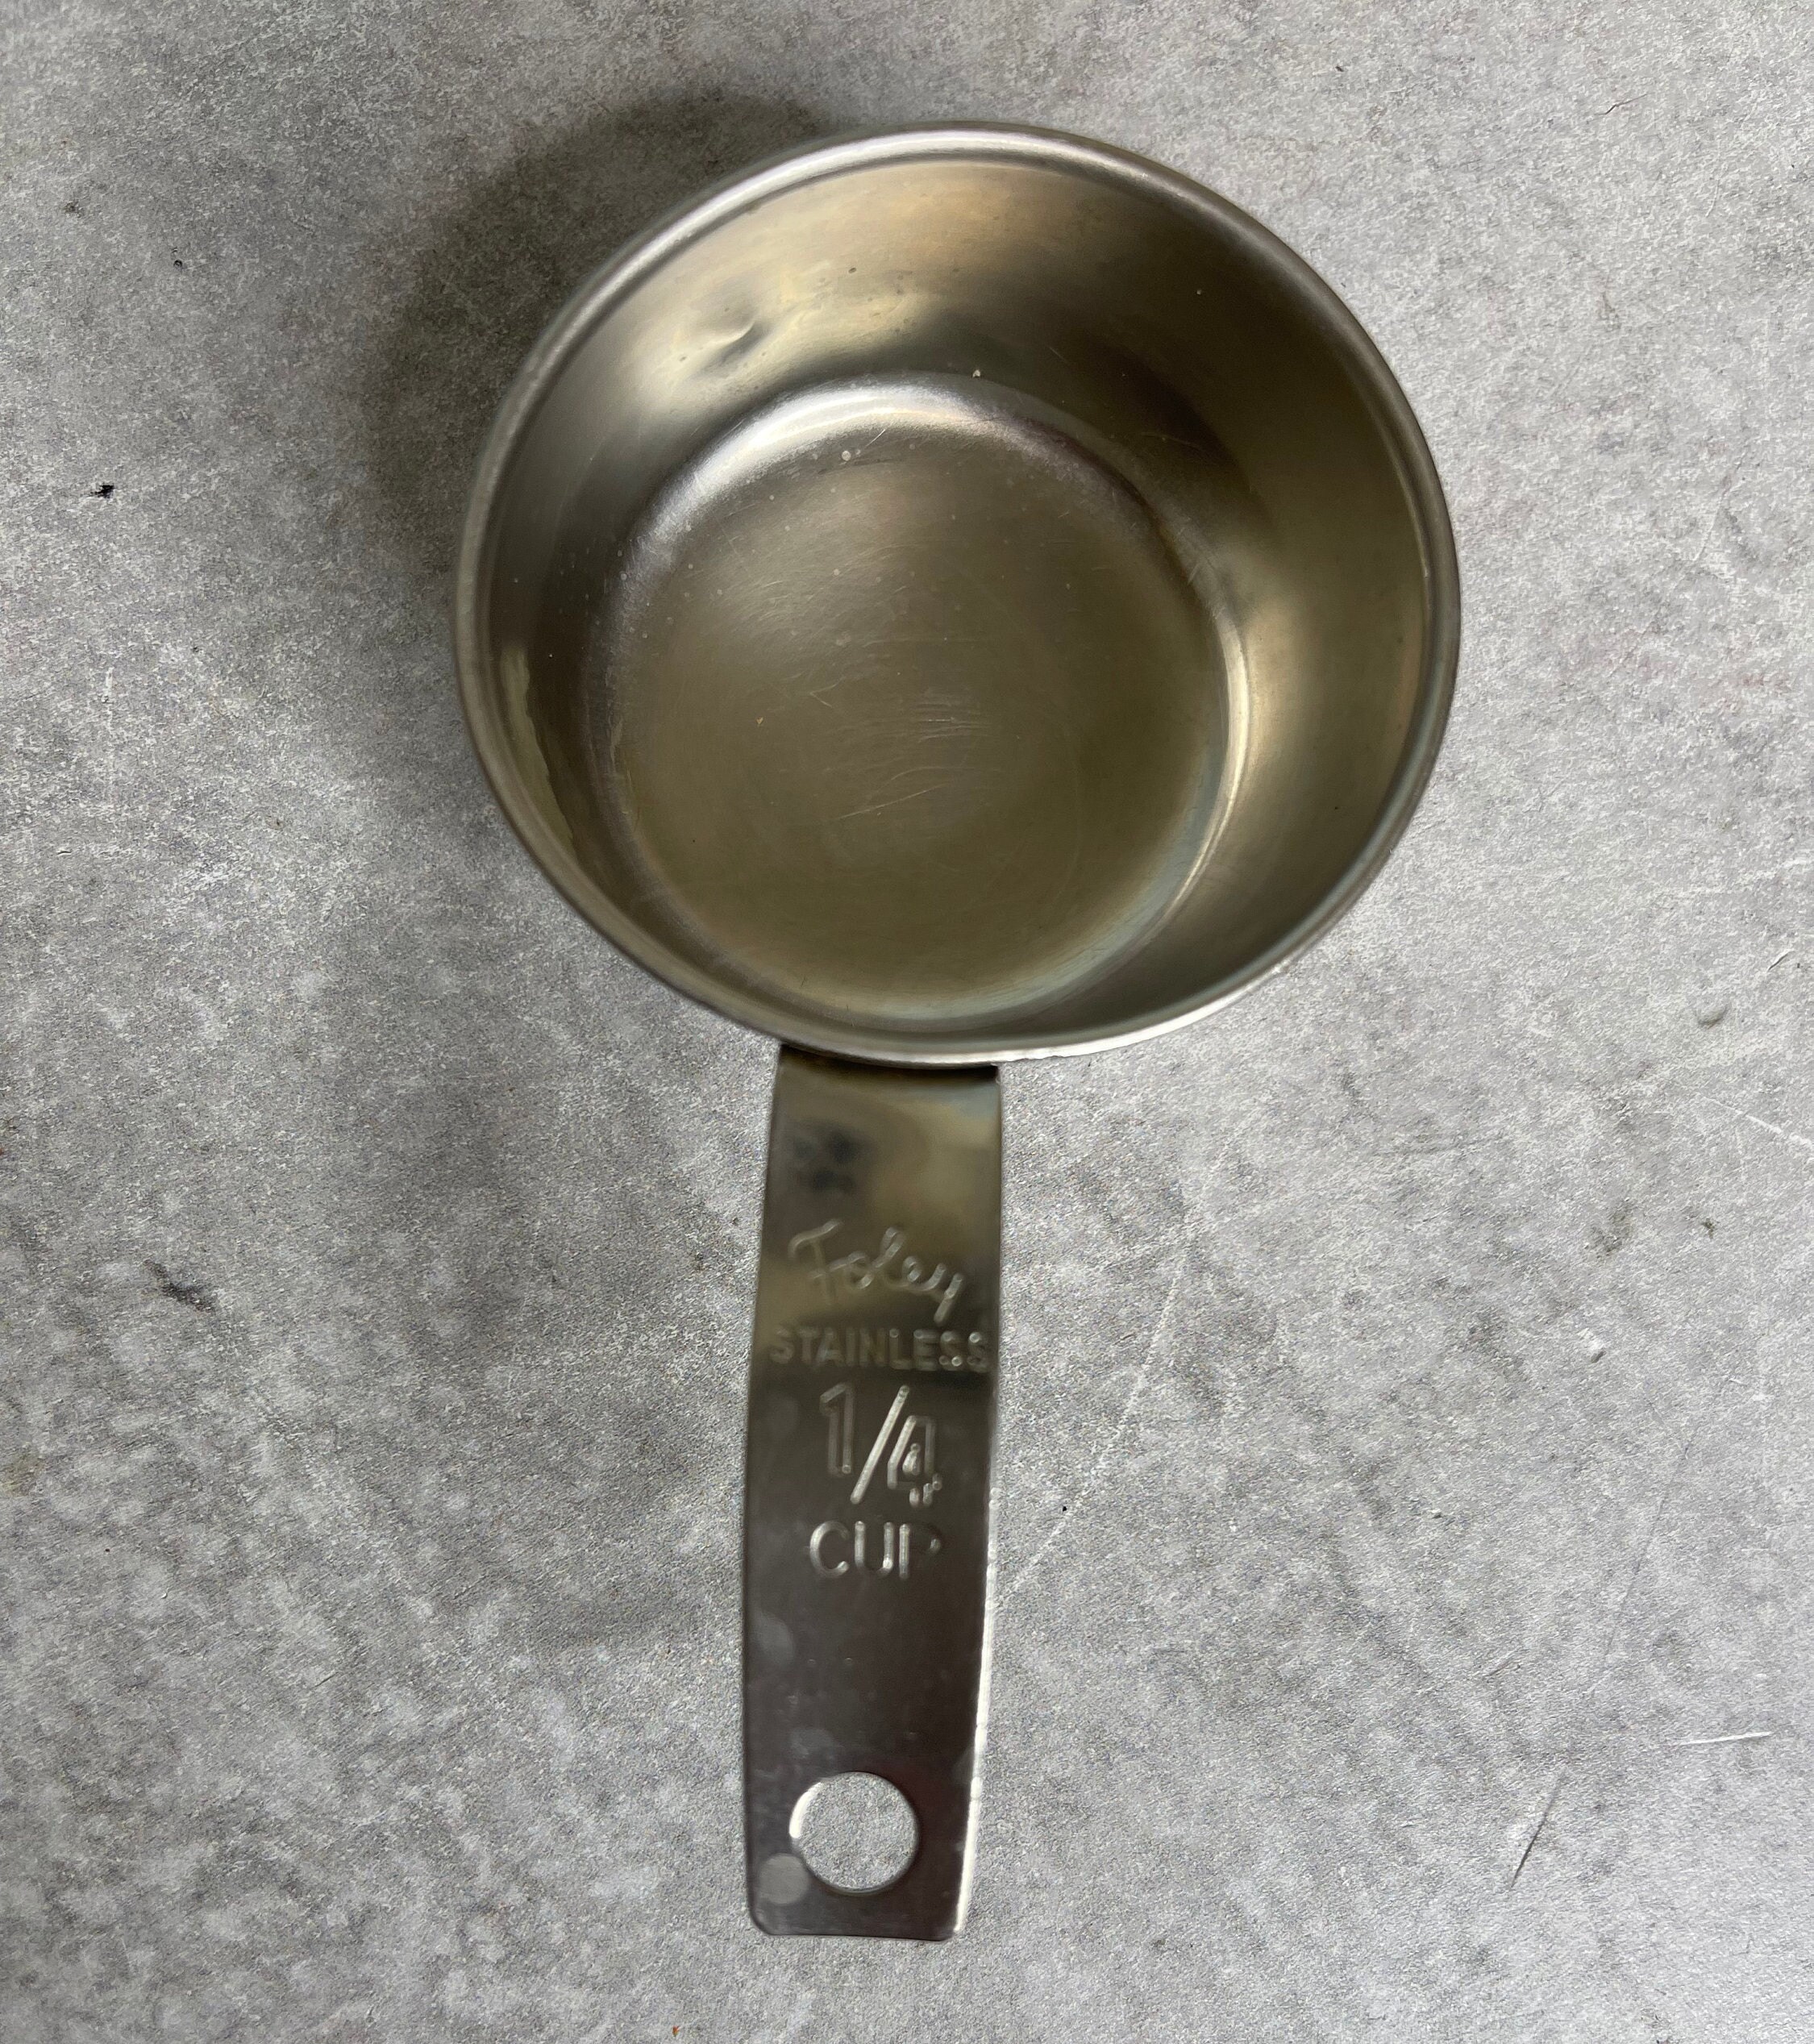 Vintage Foley 1/4 Cup Measuring Cup Stainless Handle Script Logo Replacement